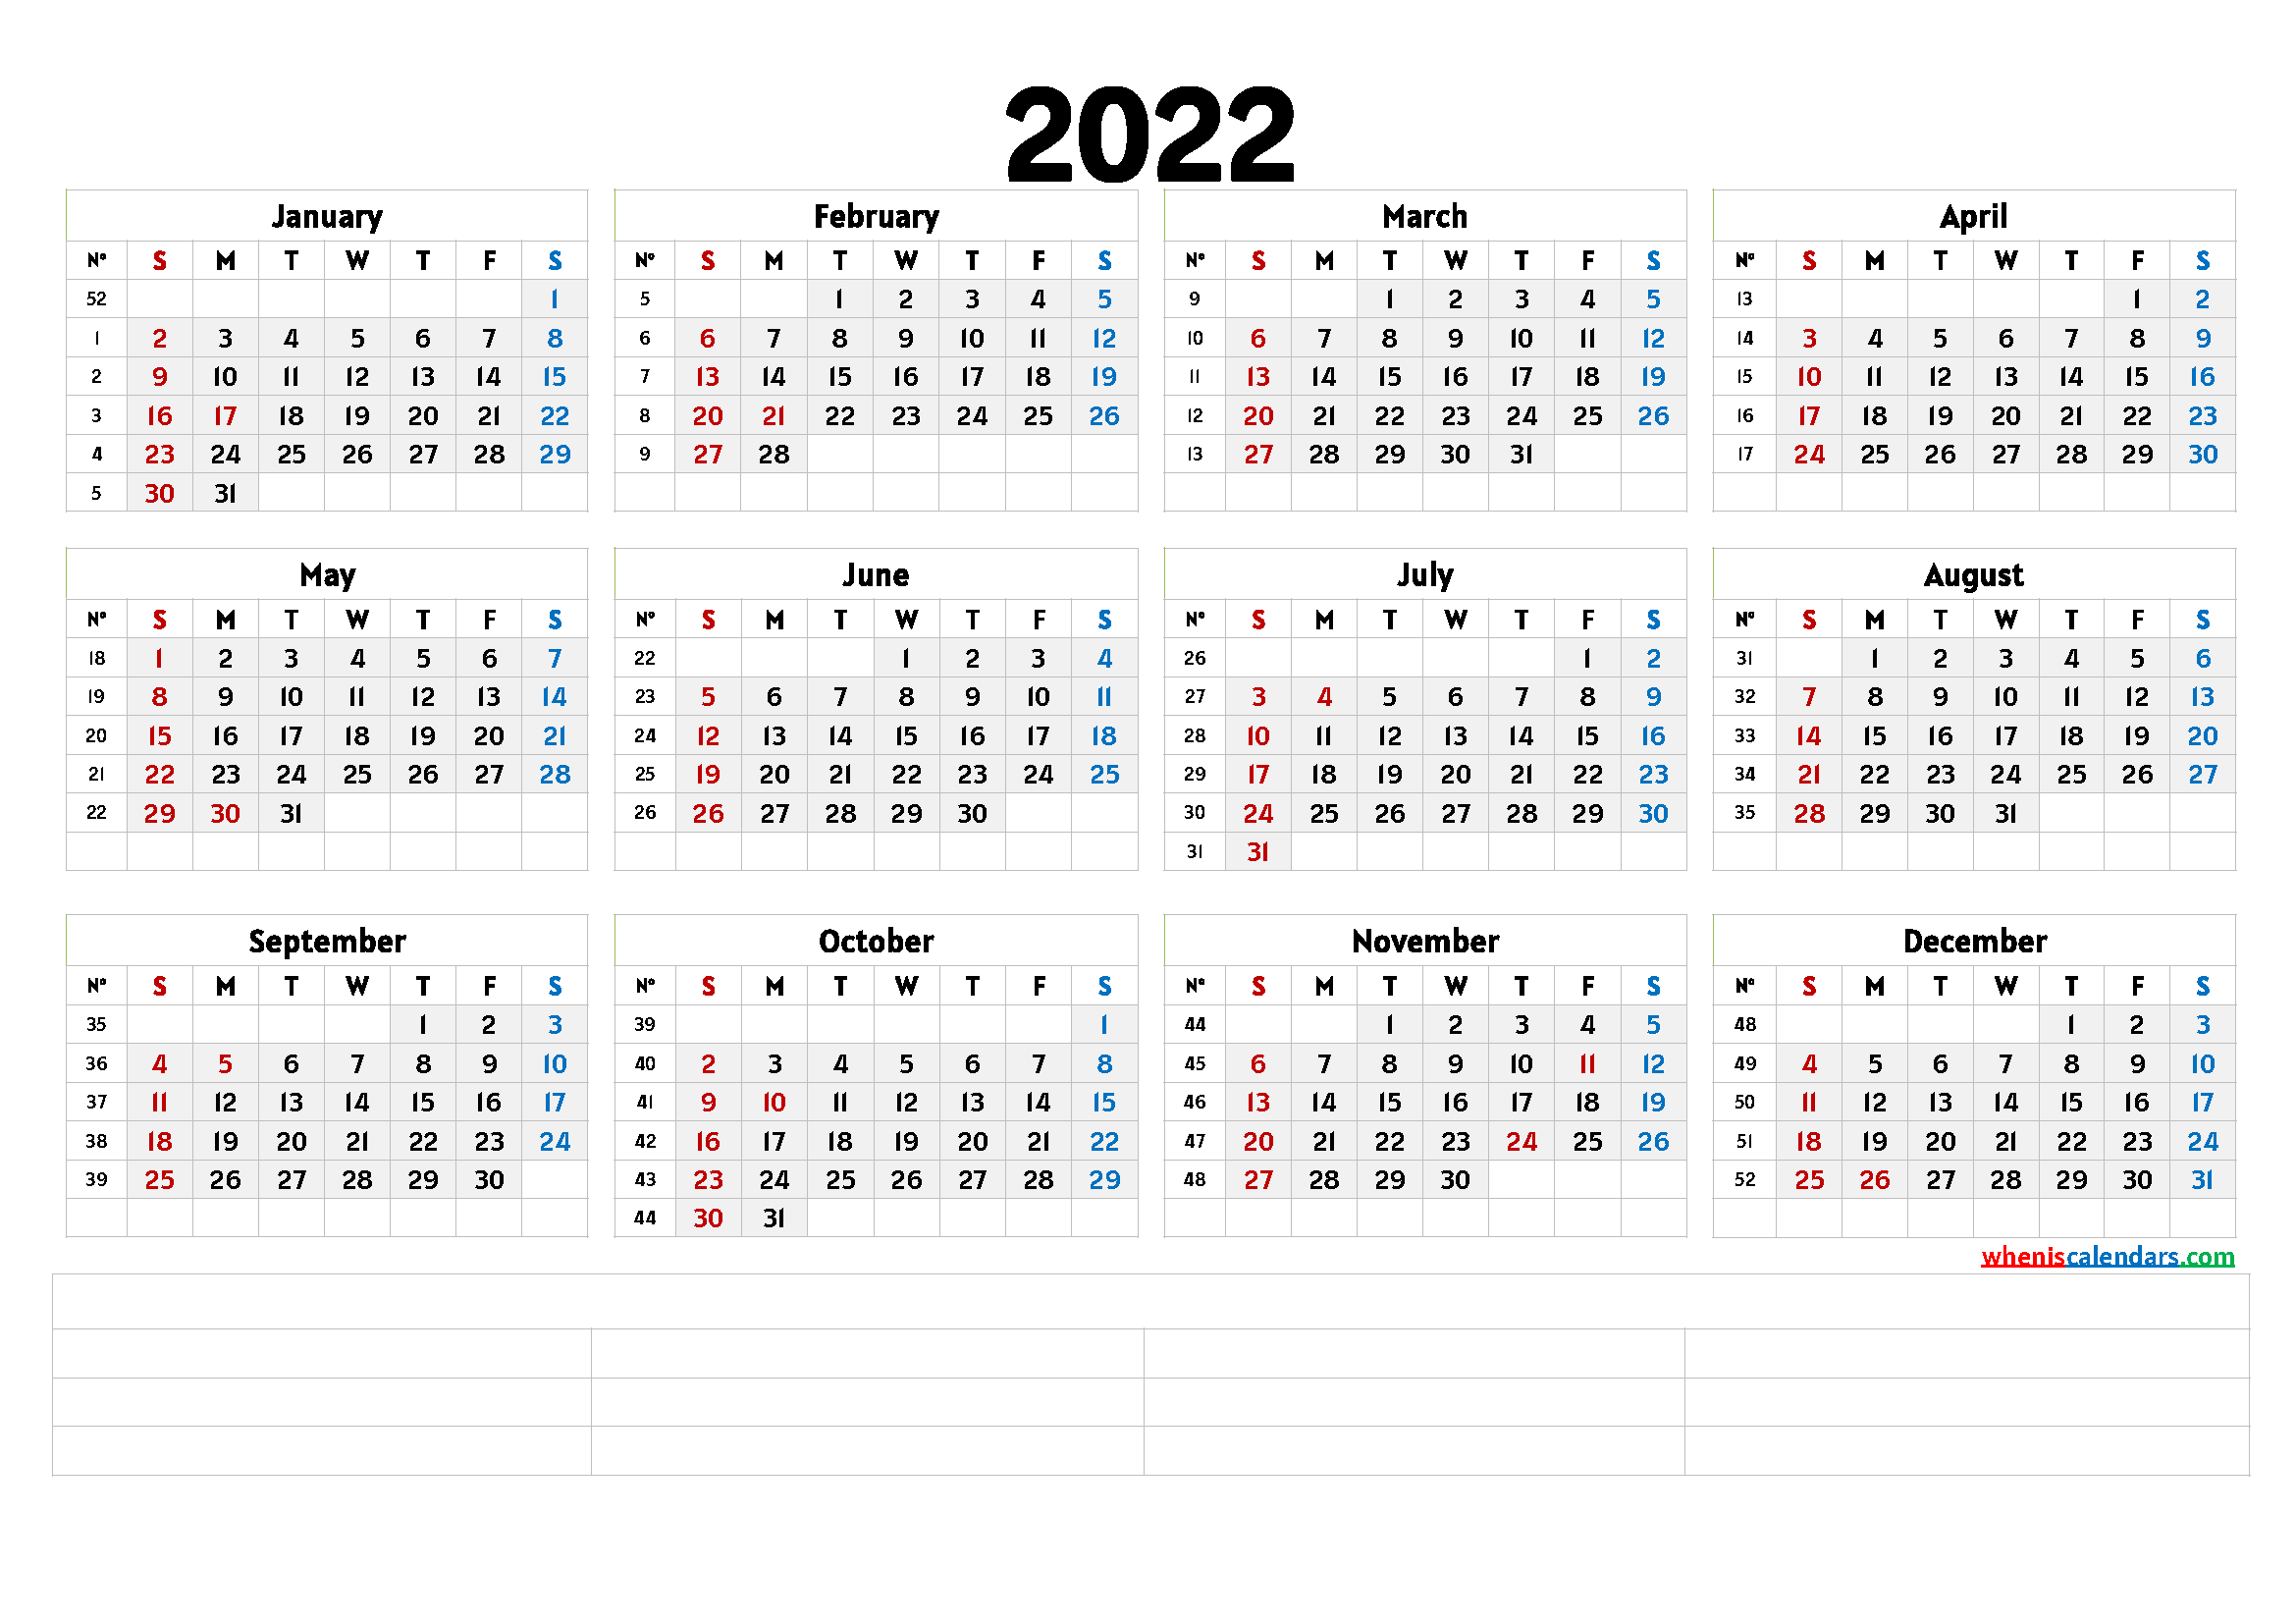 South Kent State Calendar 2022 Calendar By Week With Us Holidays